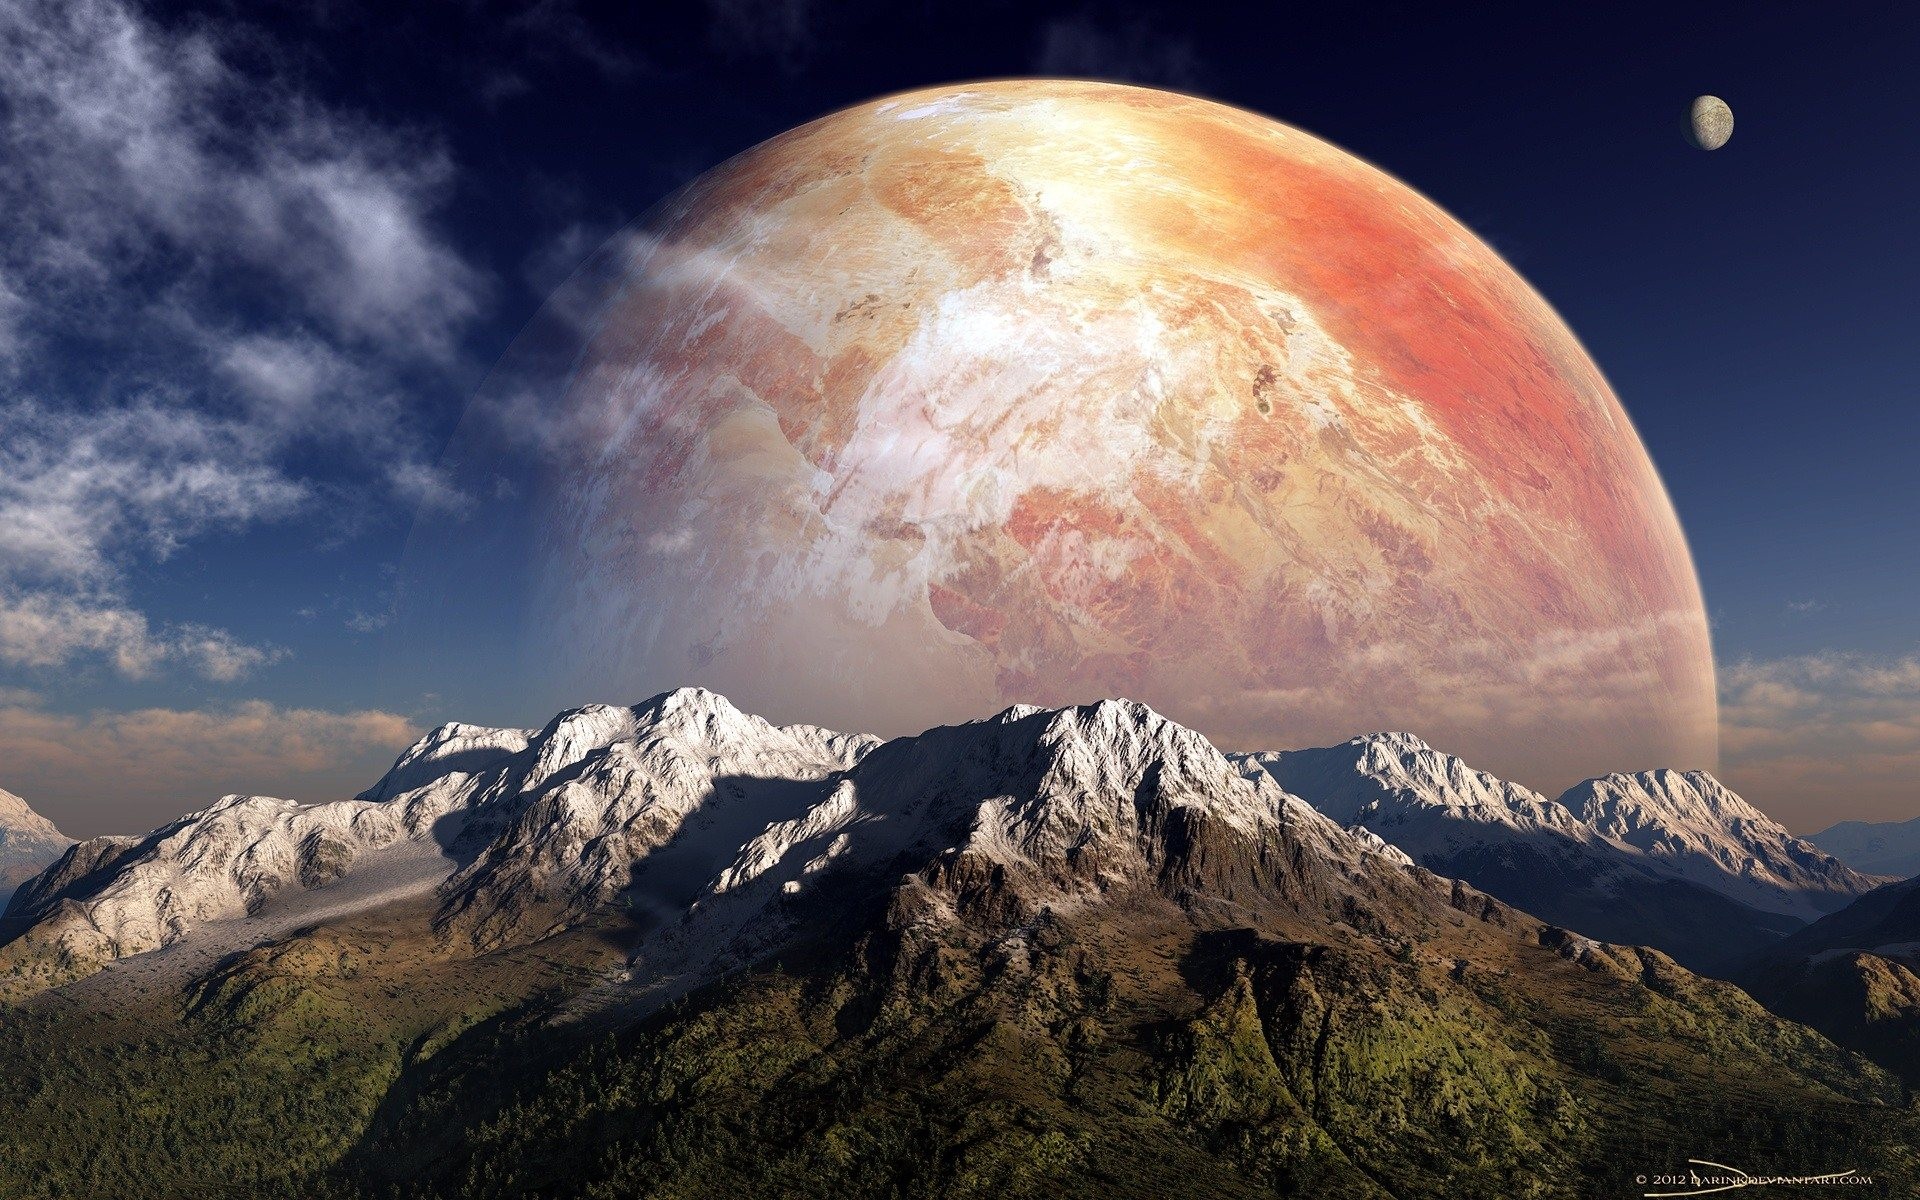 General 1920x1200 science fiction mountains planet space nature digital art